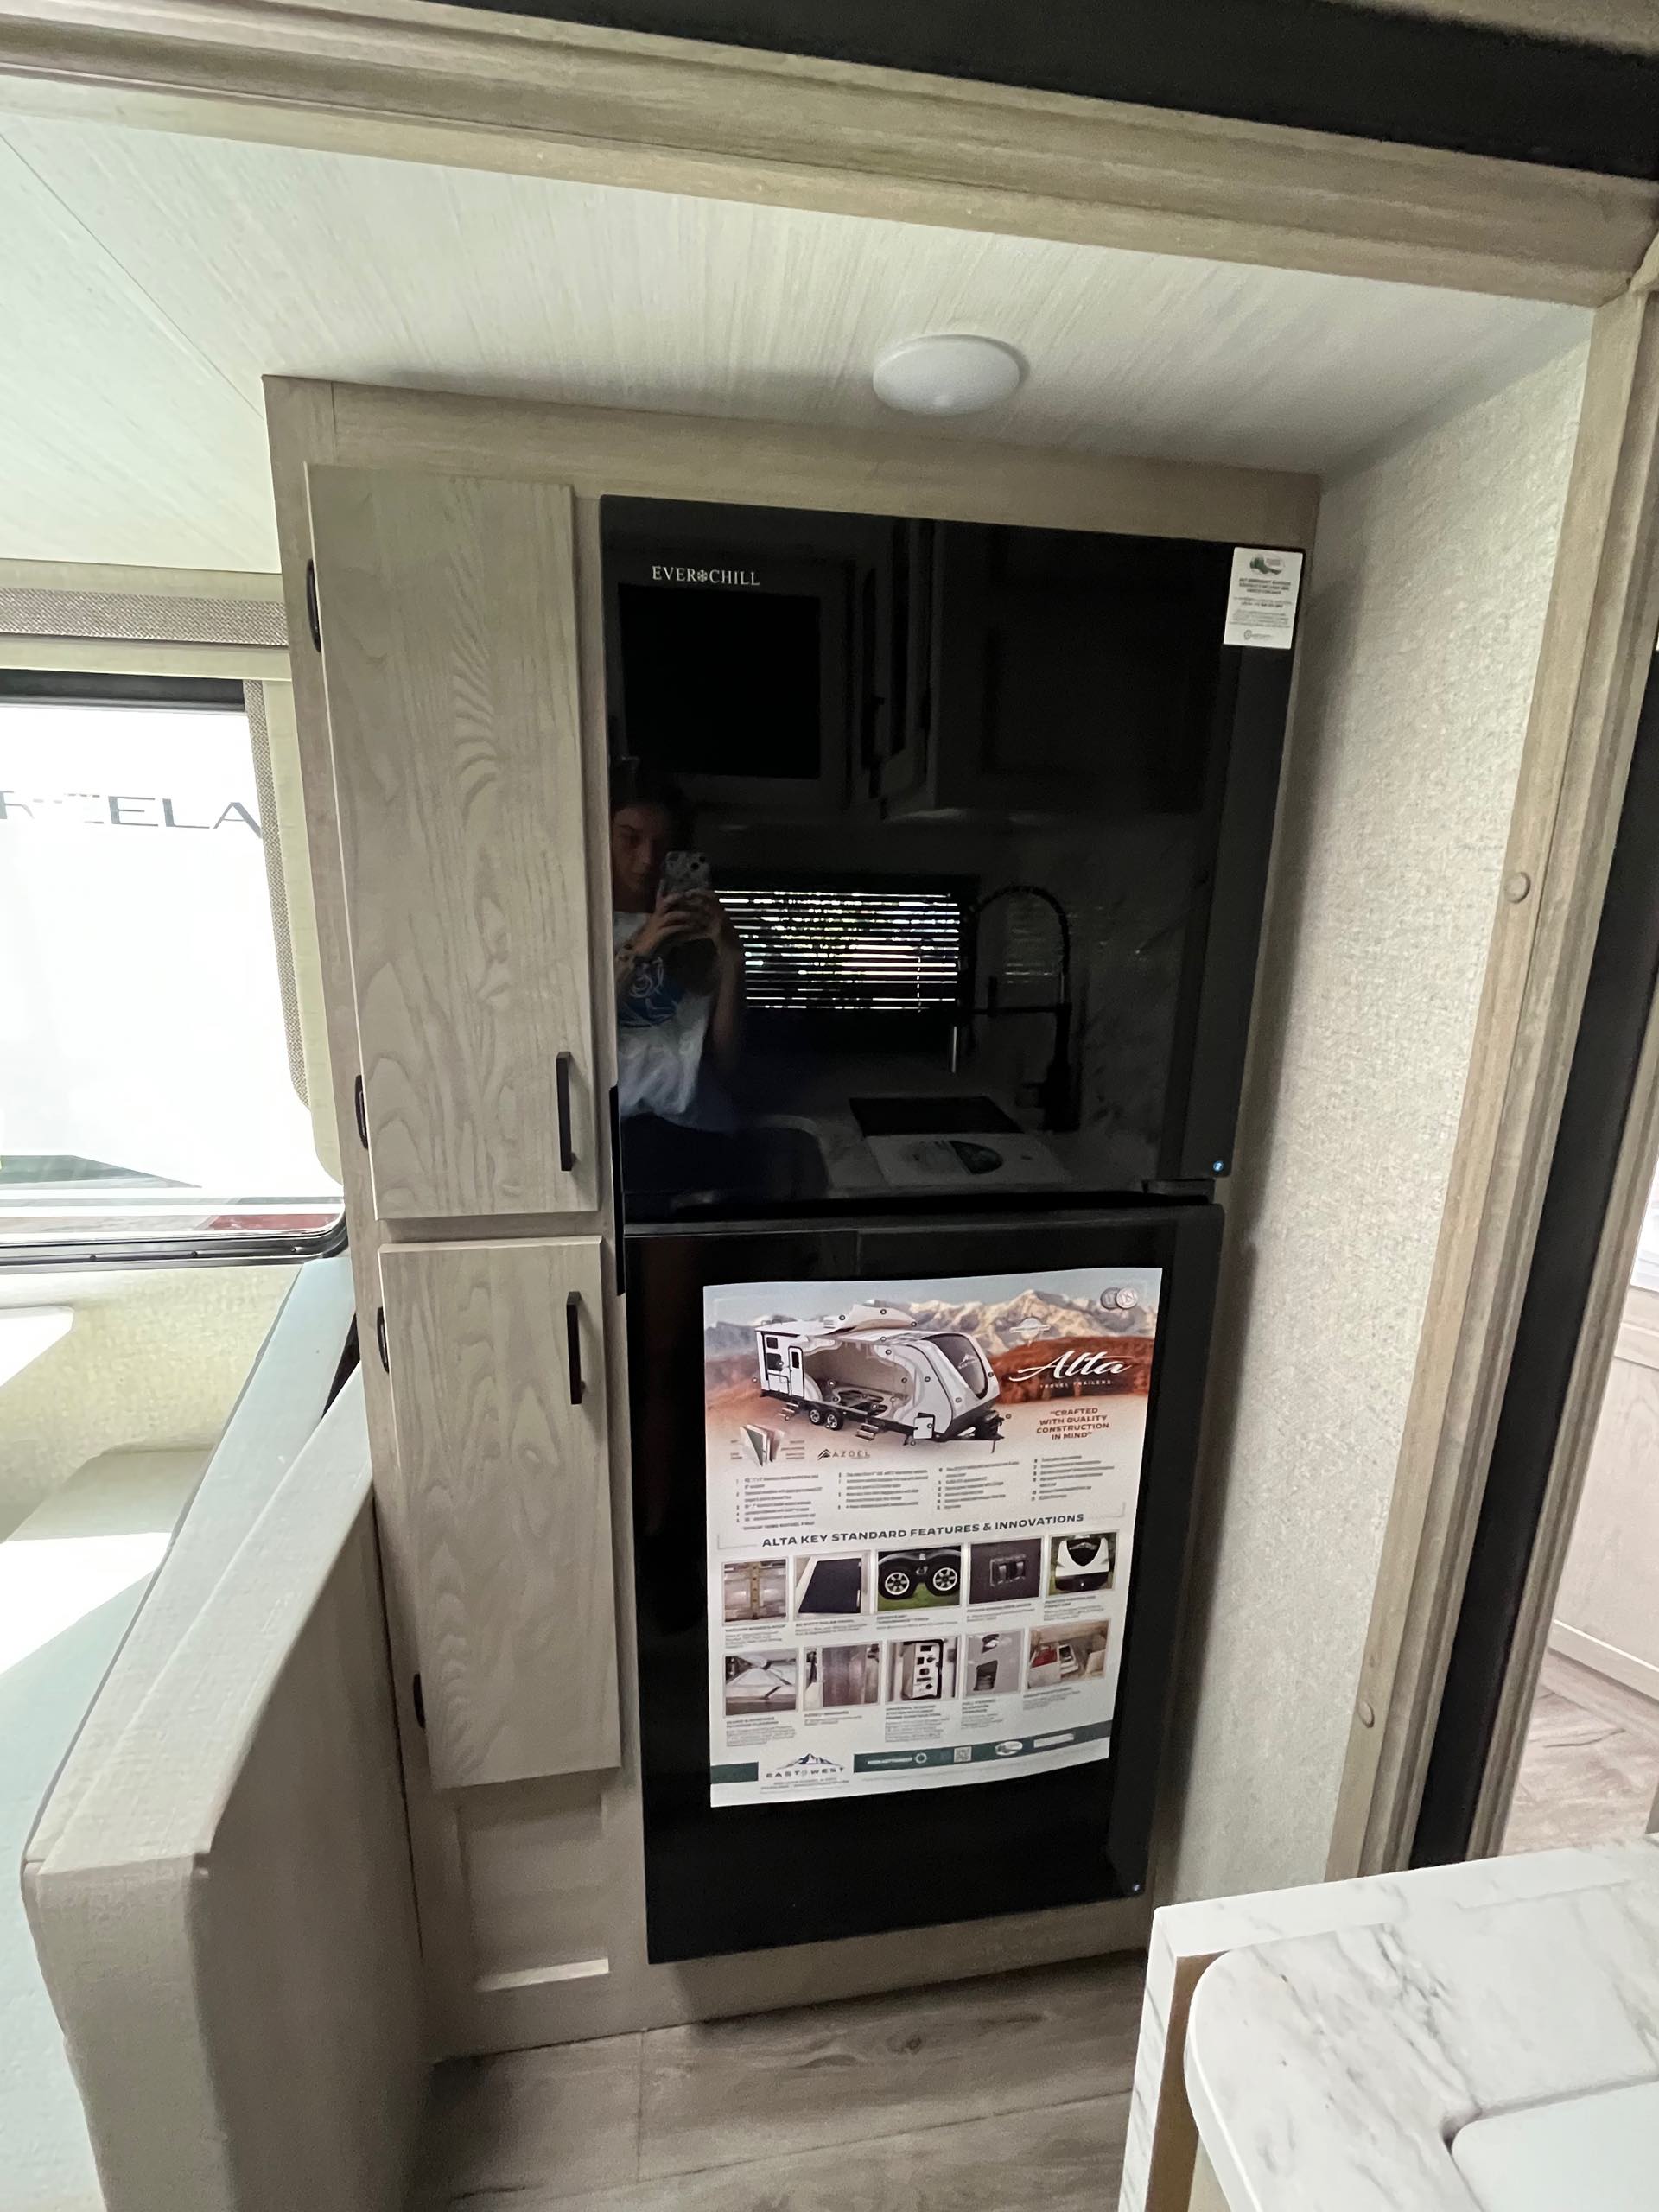 2022 EAST TO WEST 2900KBH at Prosser's Premium RV Outlet